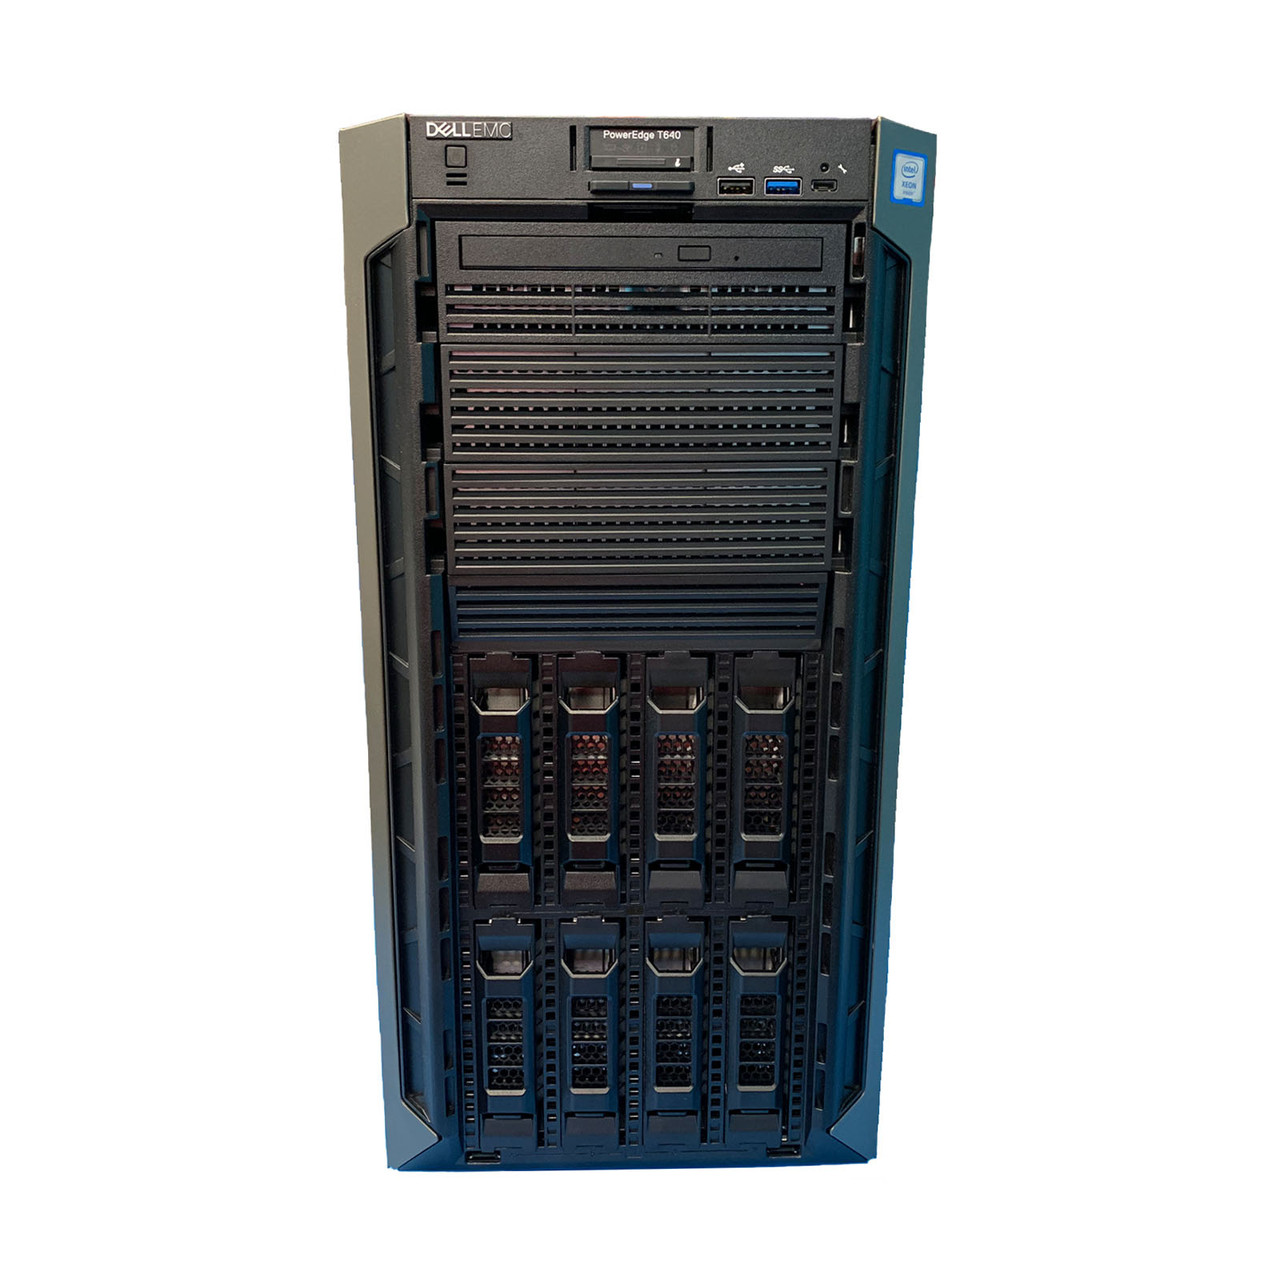 Refurbished Poweredge T640, 8HDD LFF 3.5" Configured to Order